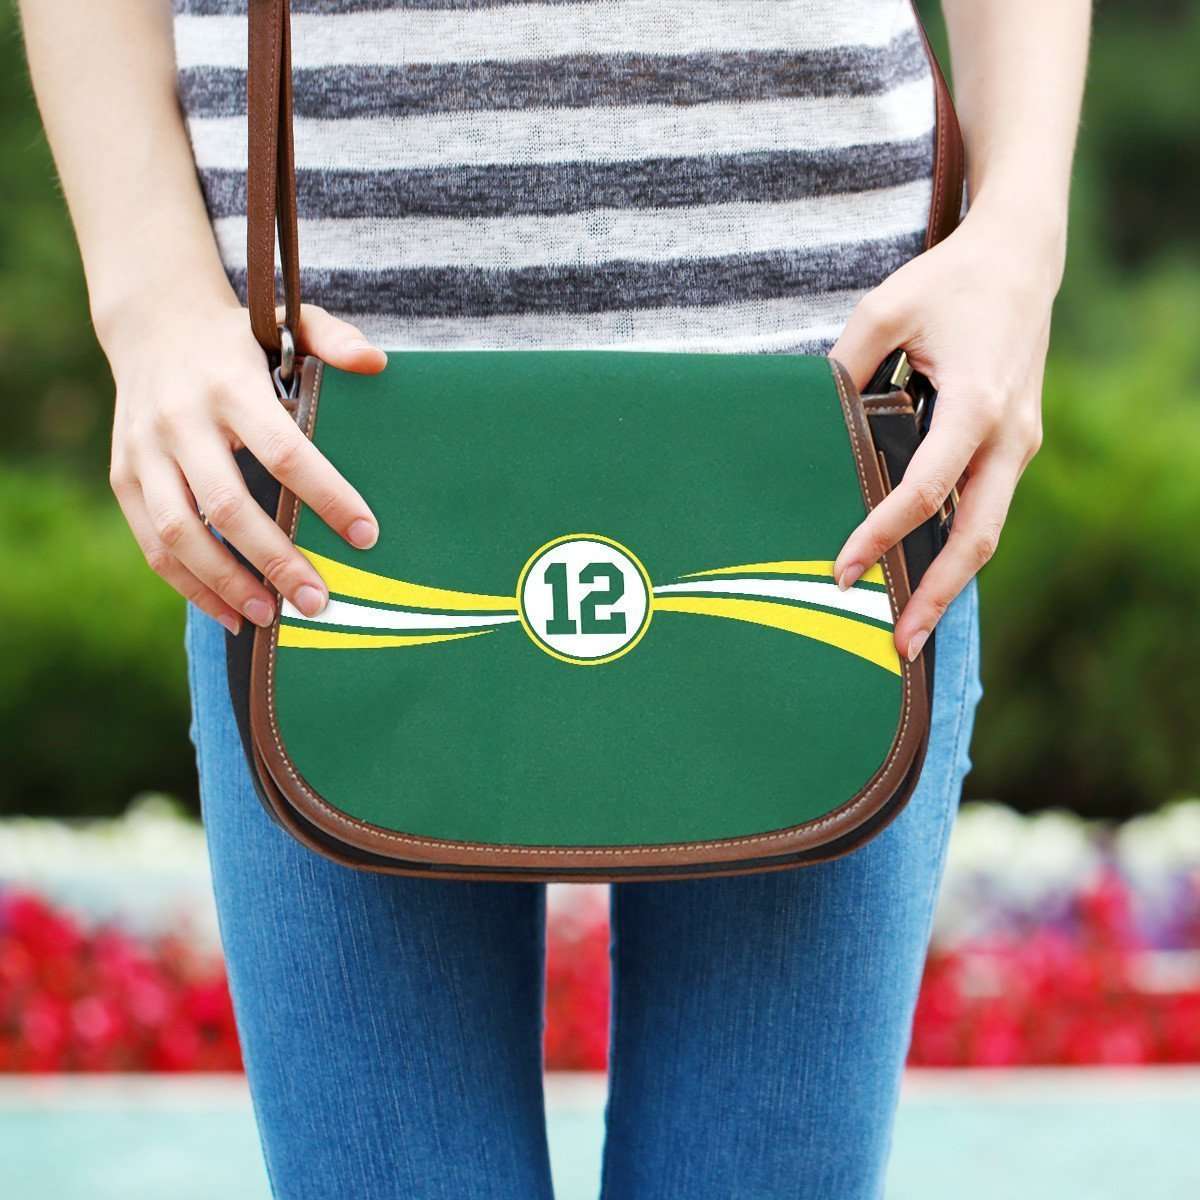 Designs by MyUtopia Shout Out:#12 Green Bay Fan Canvas Saddlebag Style Crossbody Purse